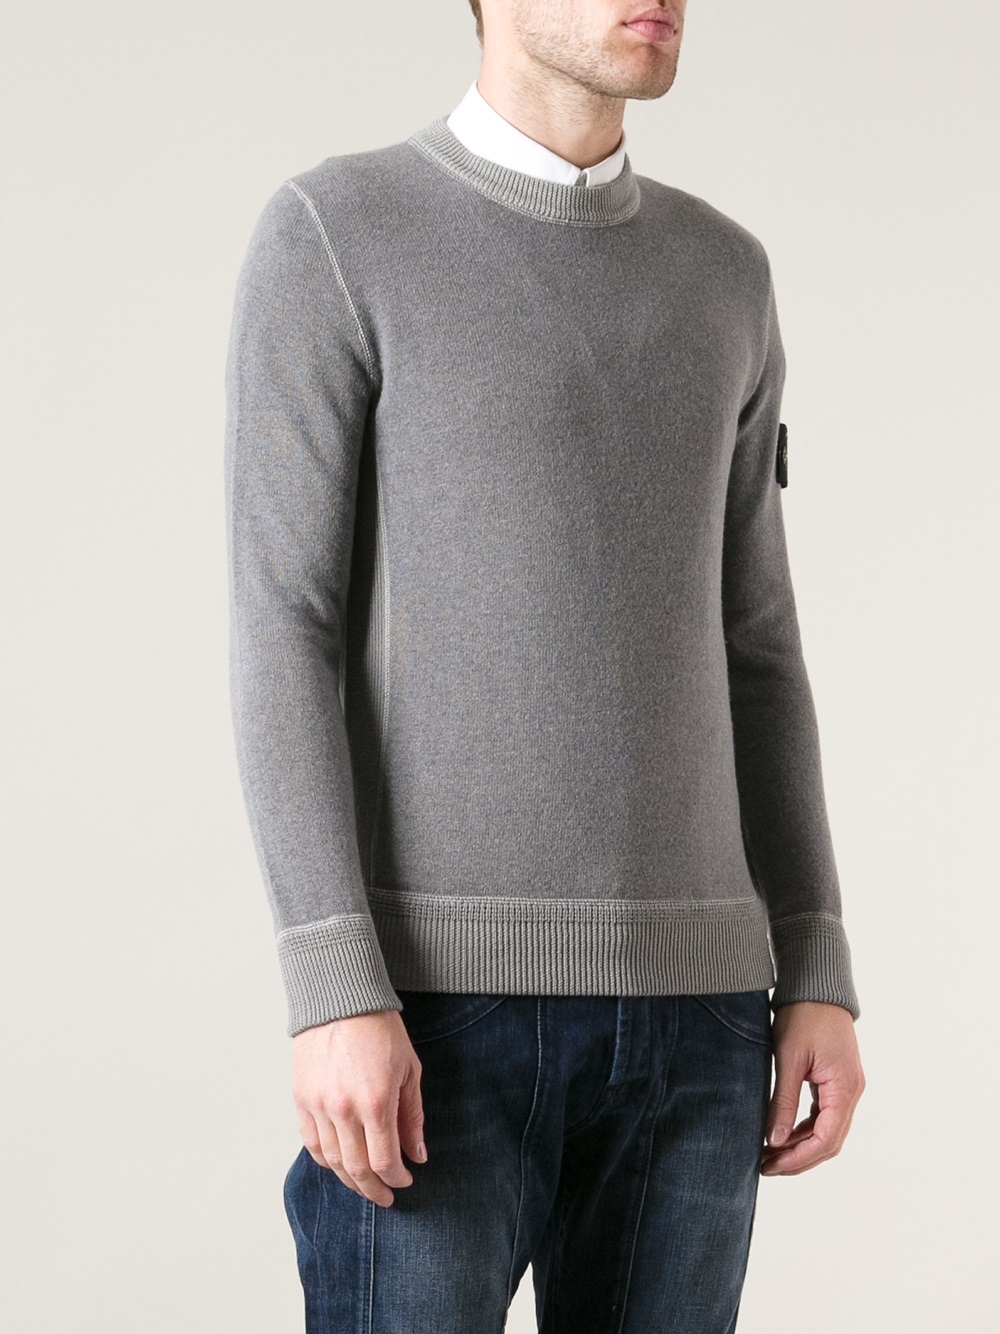 Lyst - Stone Island Fitted Jumper in Gray for Men